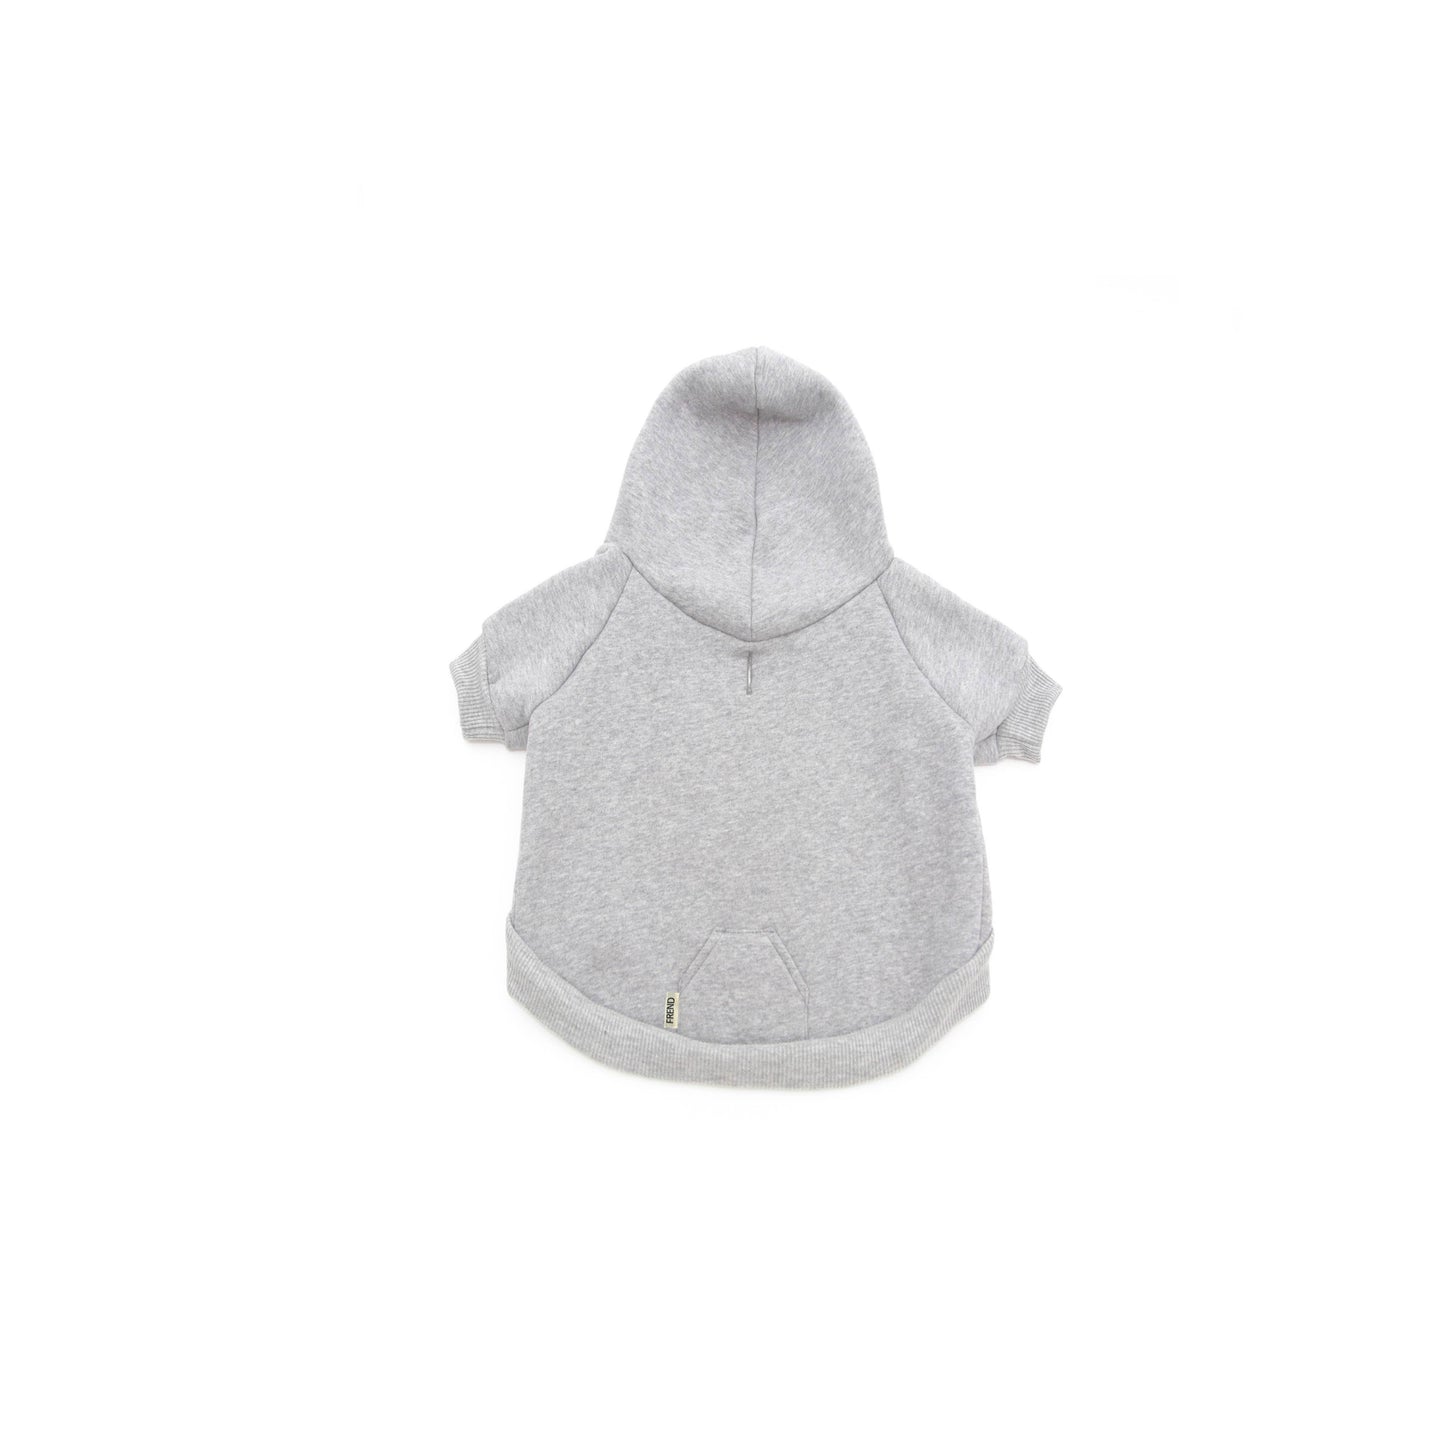 Sweatshirt for pets and dogs in grey heather cotton fleece